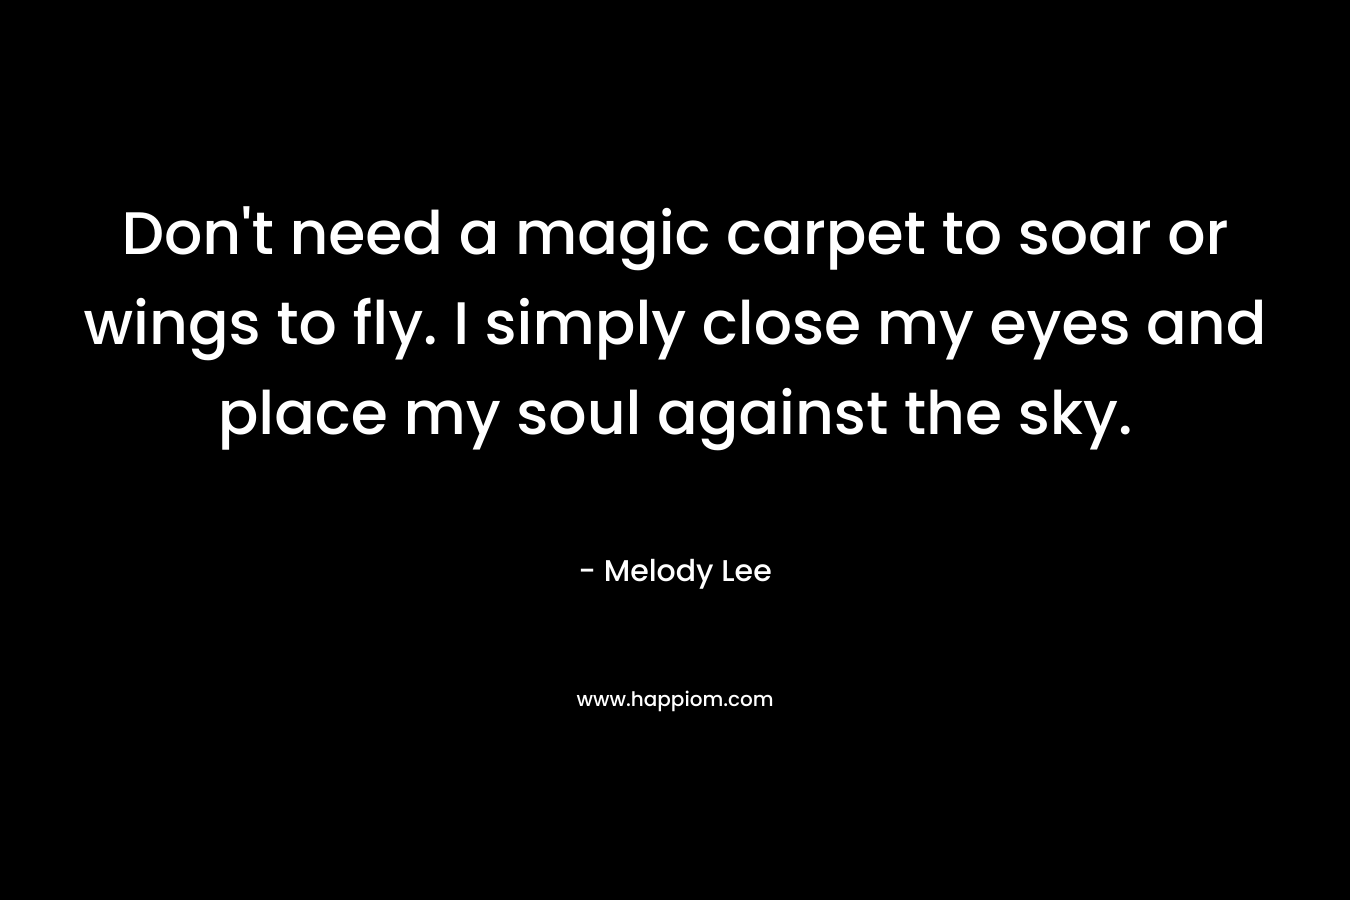 Don't need a magic carpet to soar or wings to fly. I simply close my eyes and place my soul against the sky.